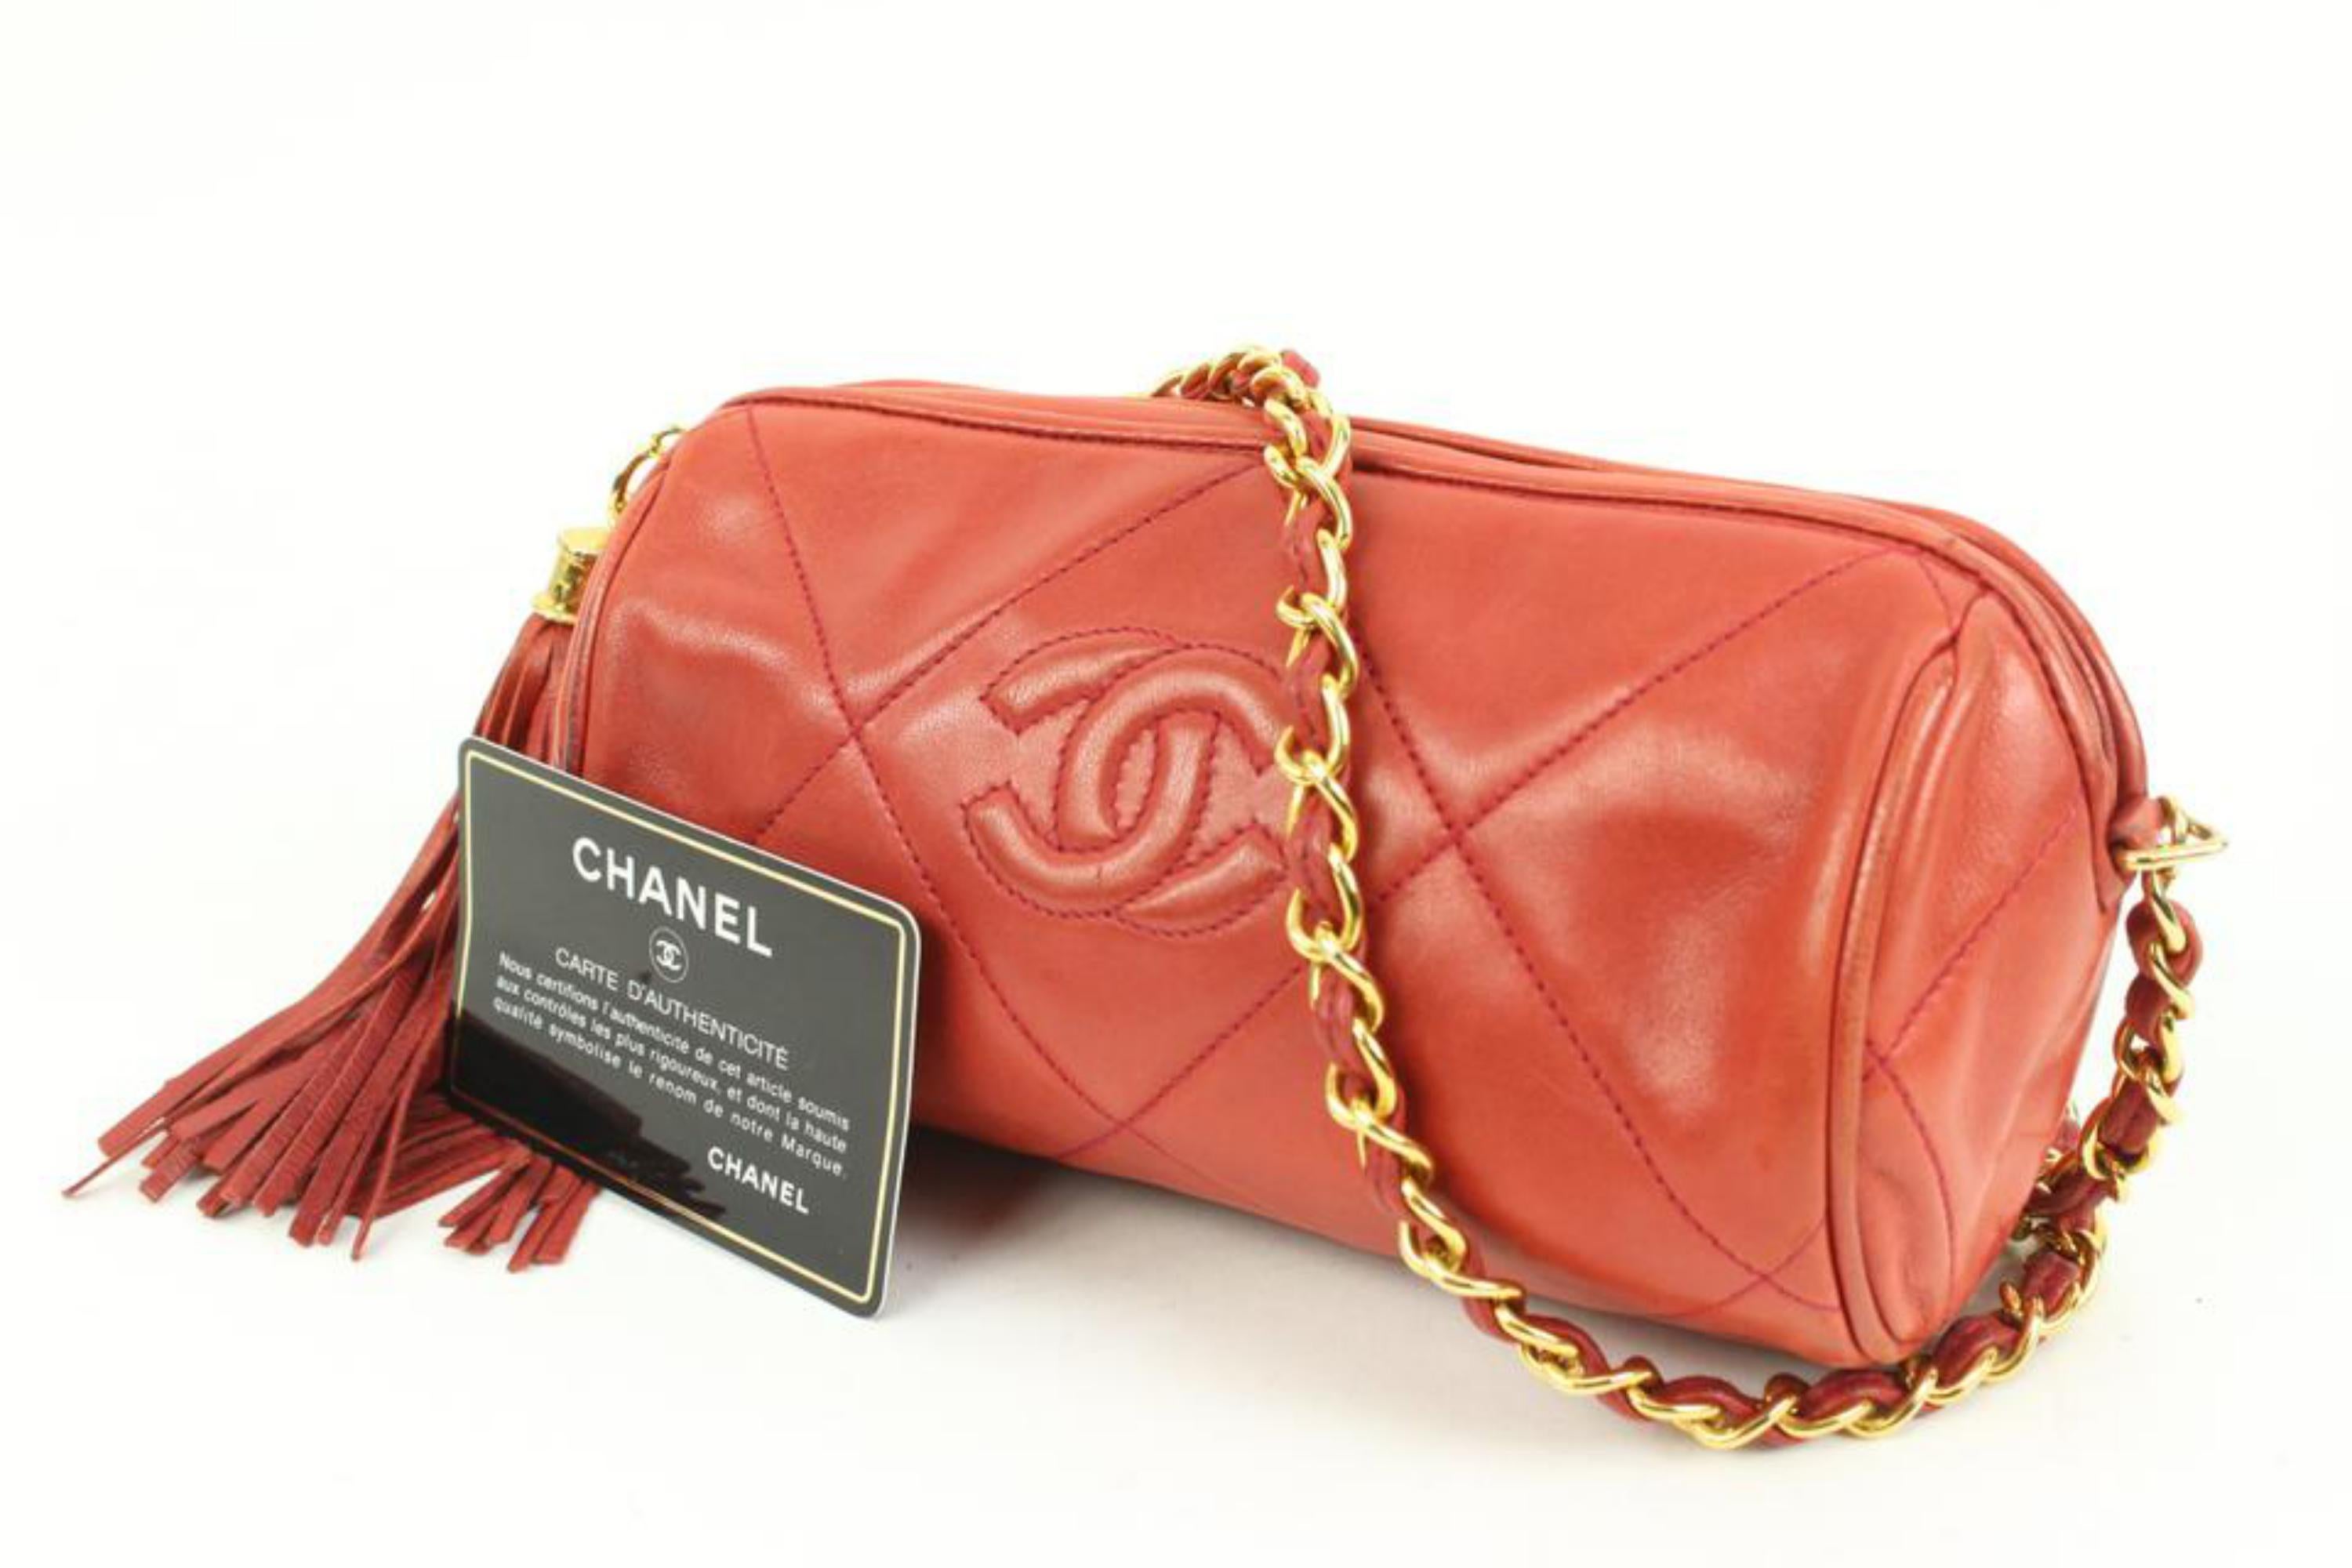 Chanel Red Quilted Barrel Fringe Tassel Round Crossbody 45ck7
Date Code/Serial Number: 0749832
Made In: Italy
Measurements: Length:  7